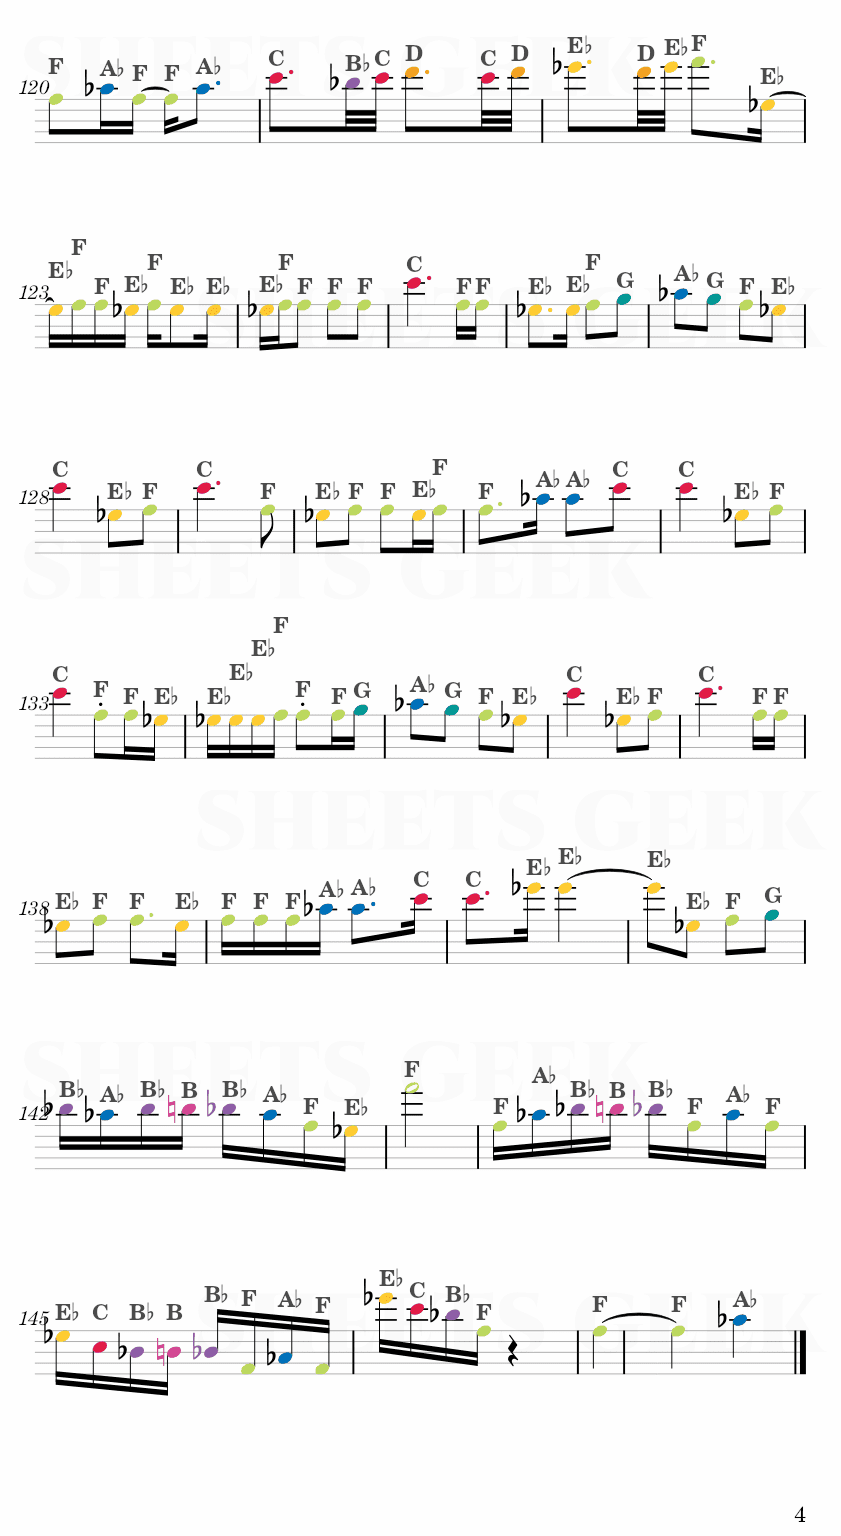 World Is Mine - Hatsune Miku Easy Sheet Music Free for piano, keyboard, flute, violin, sax, cello page 4